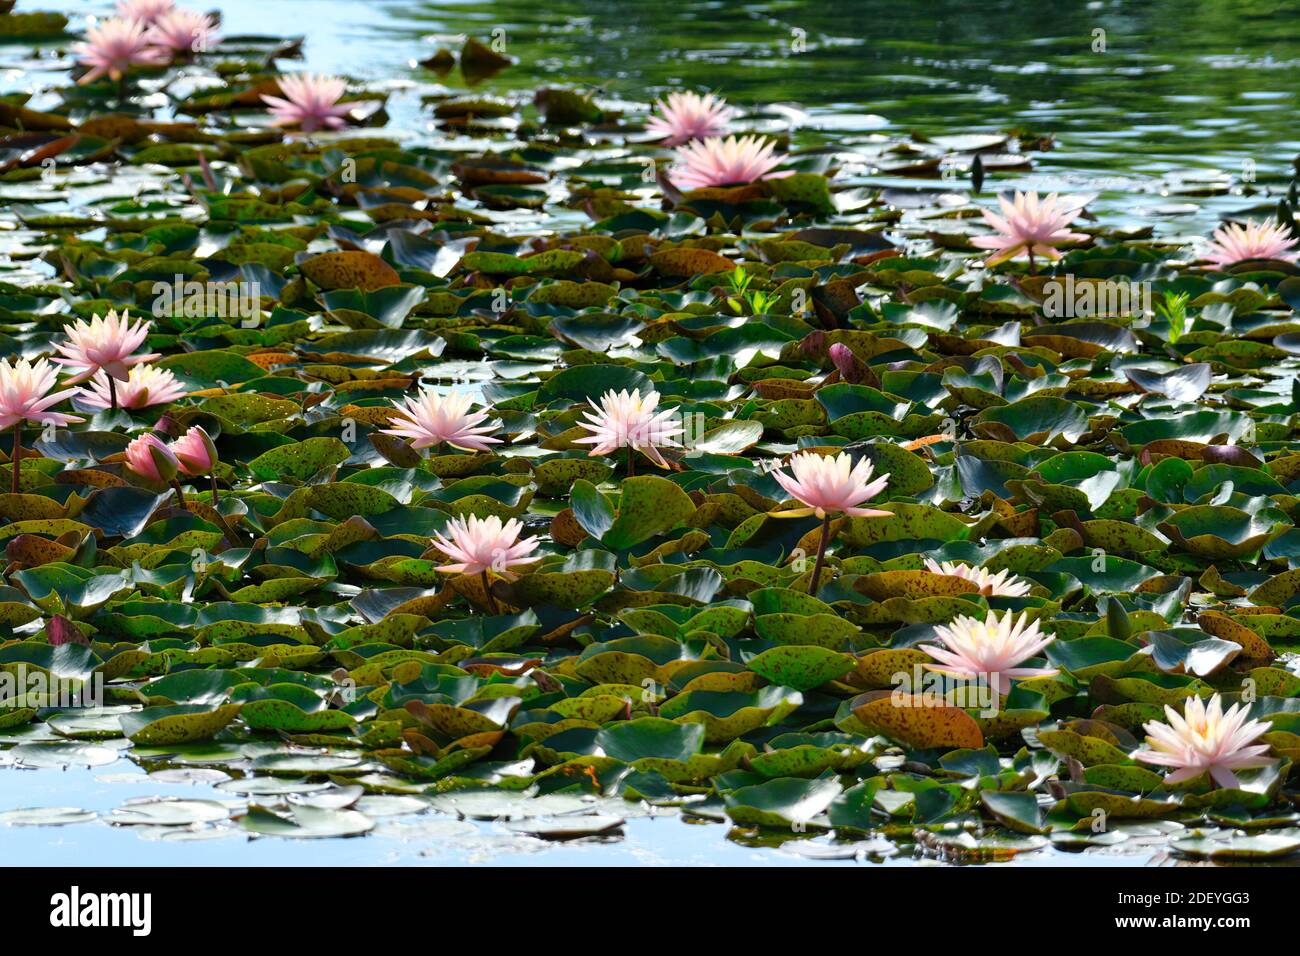 Pink Water Lilies with Short Depth of Focus Among a Bed of Lily Pads Stock Photo